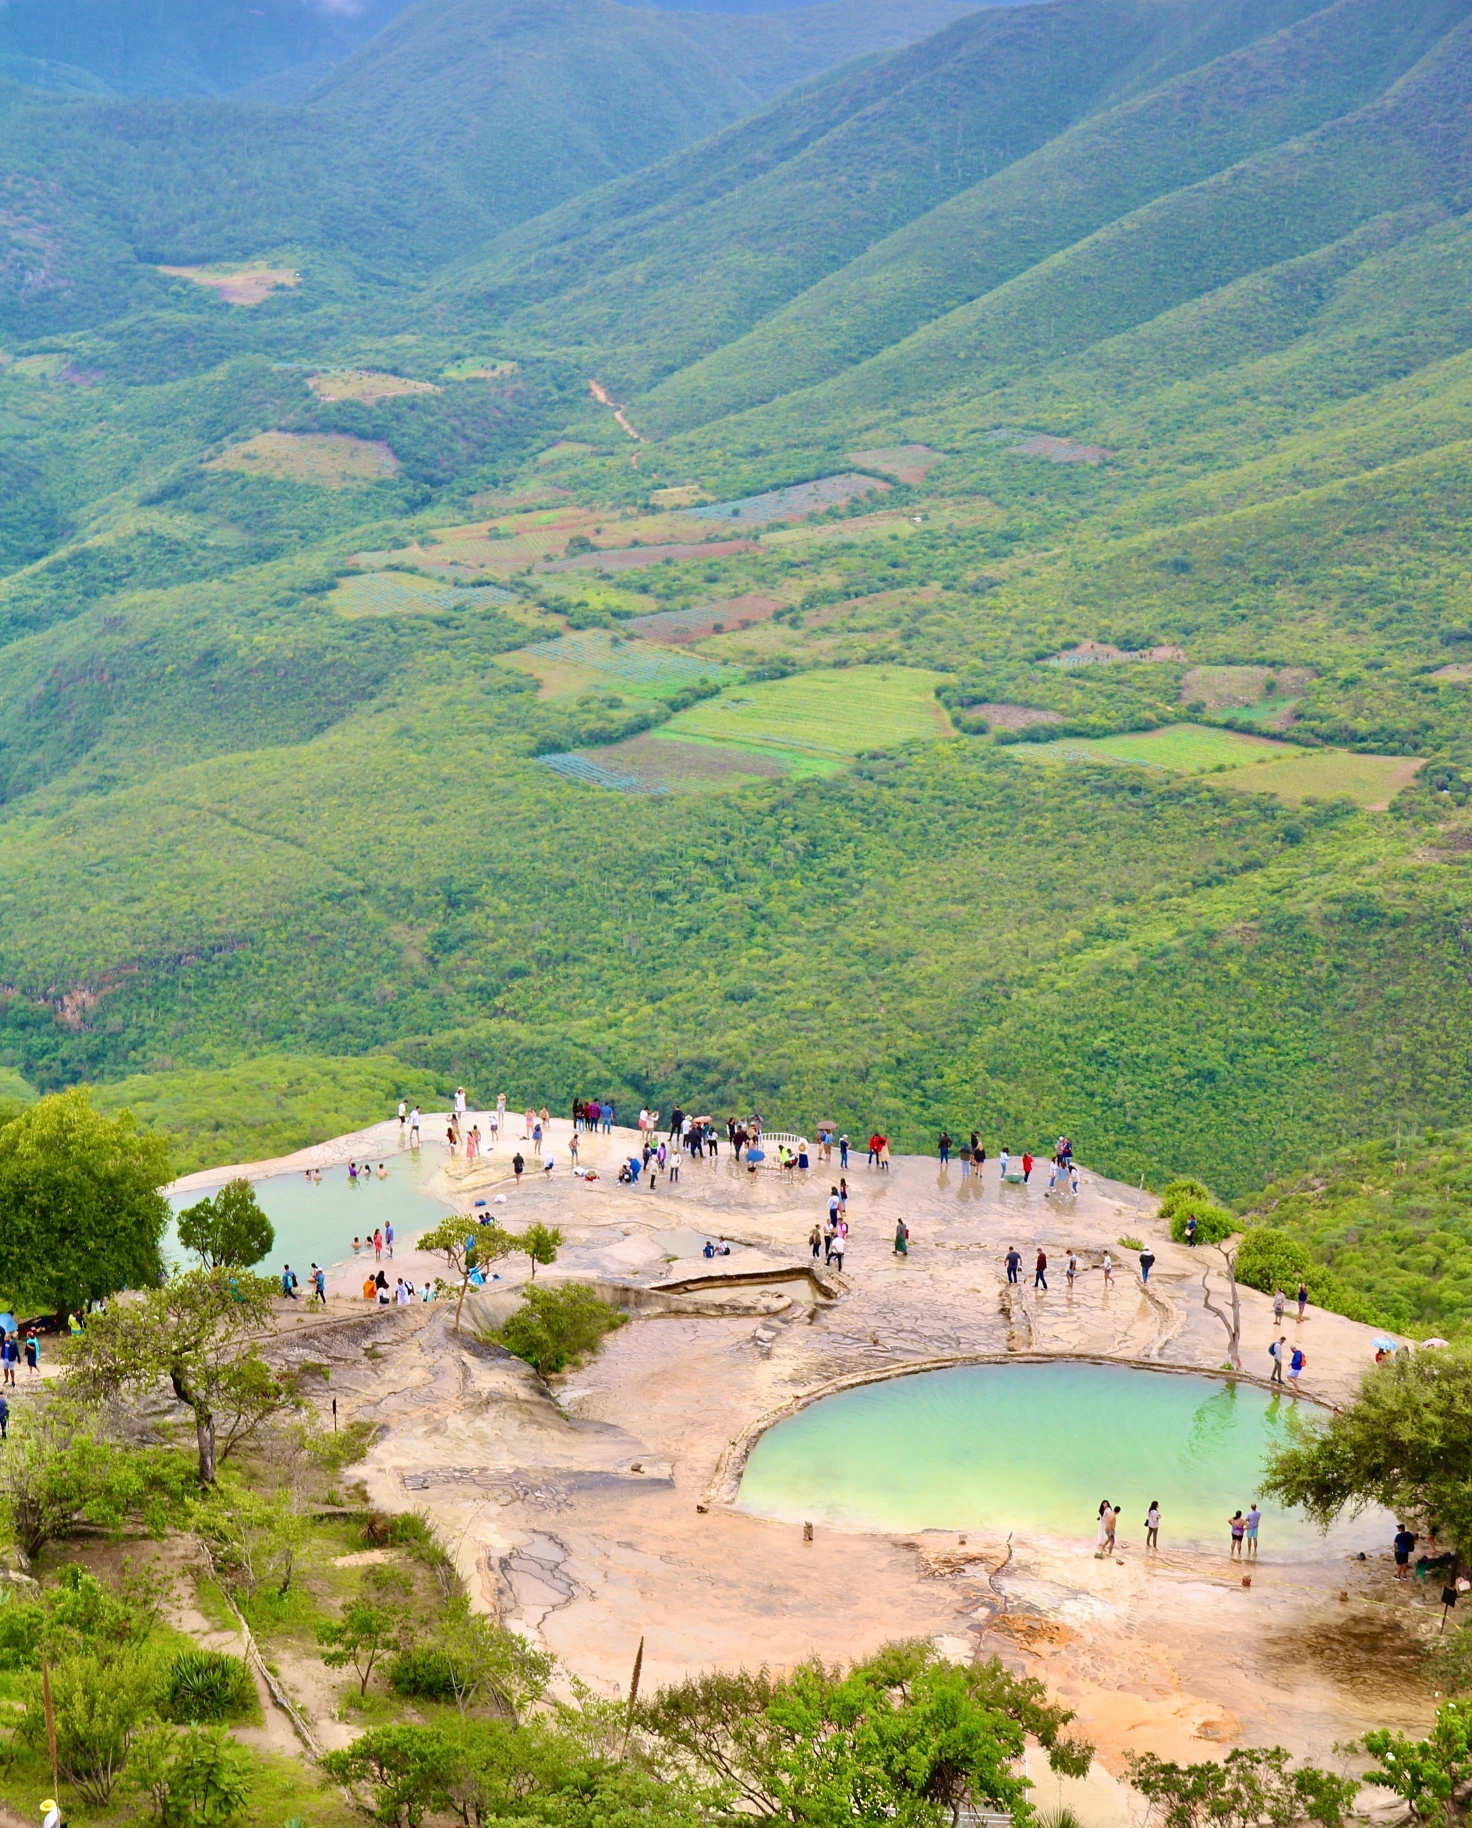 aerial view of people standing near pools of water surrounded by mountains